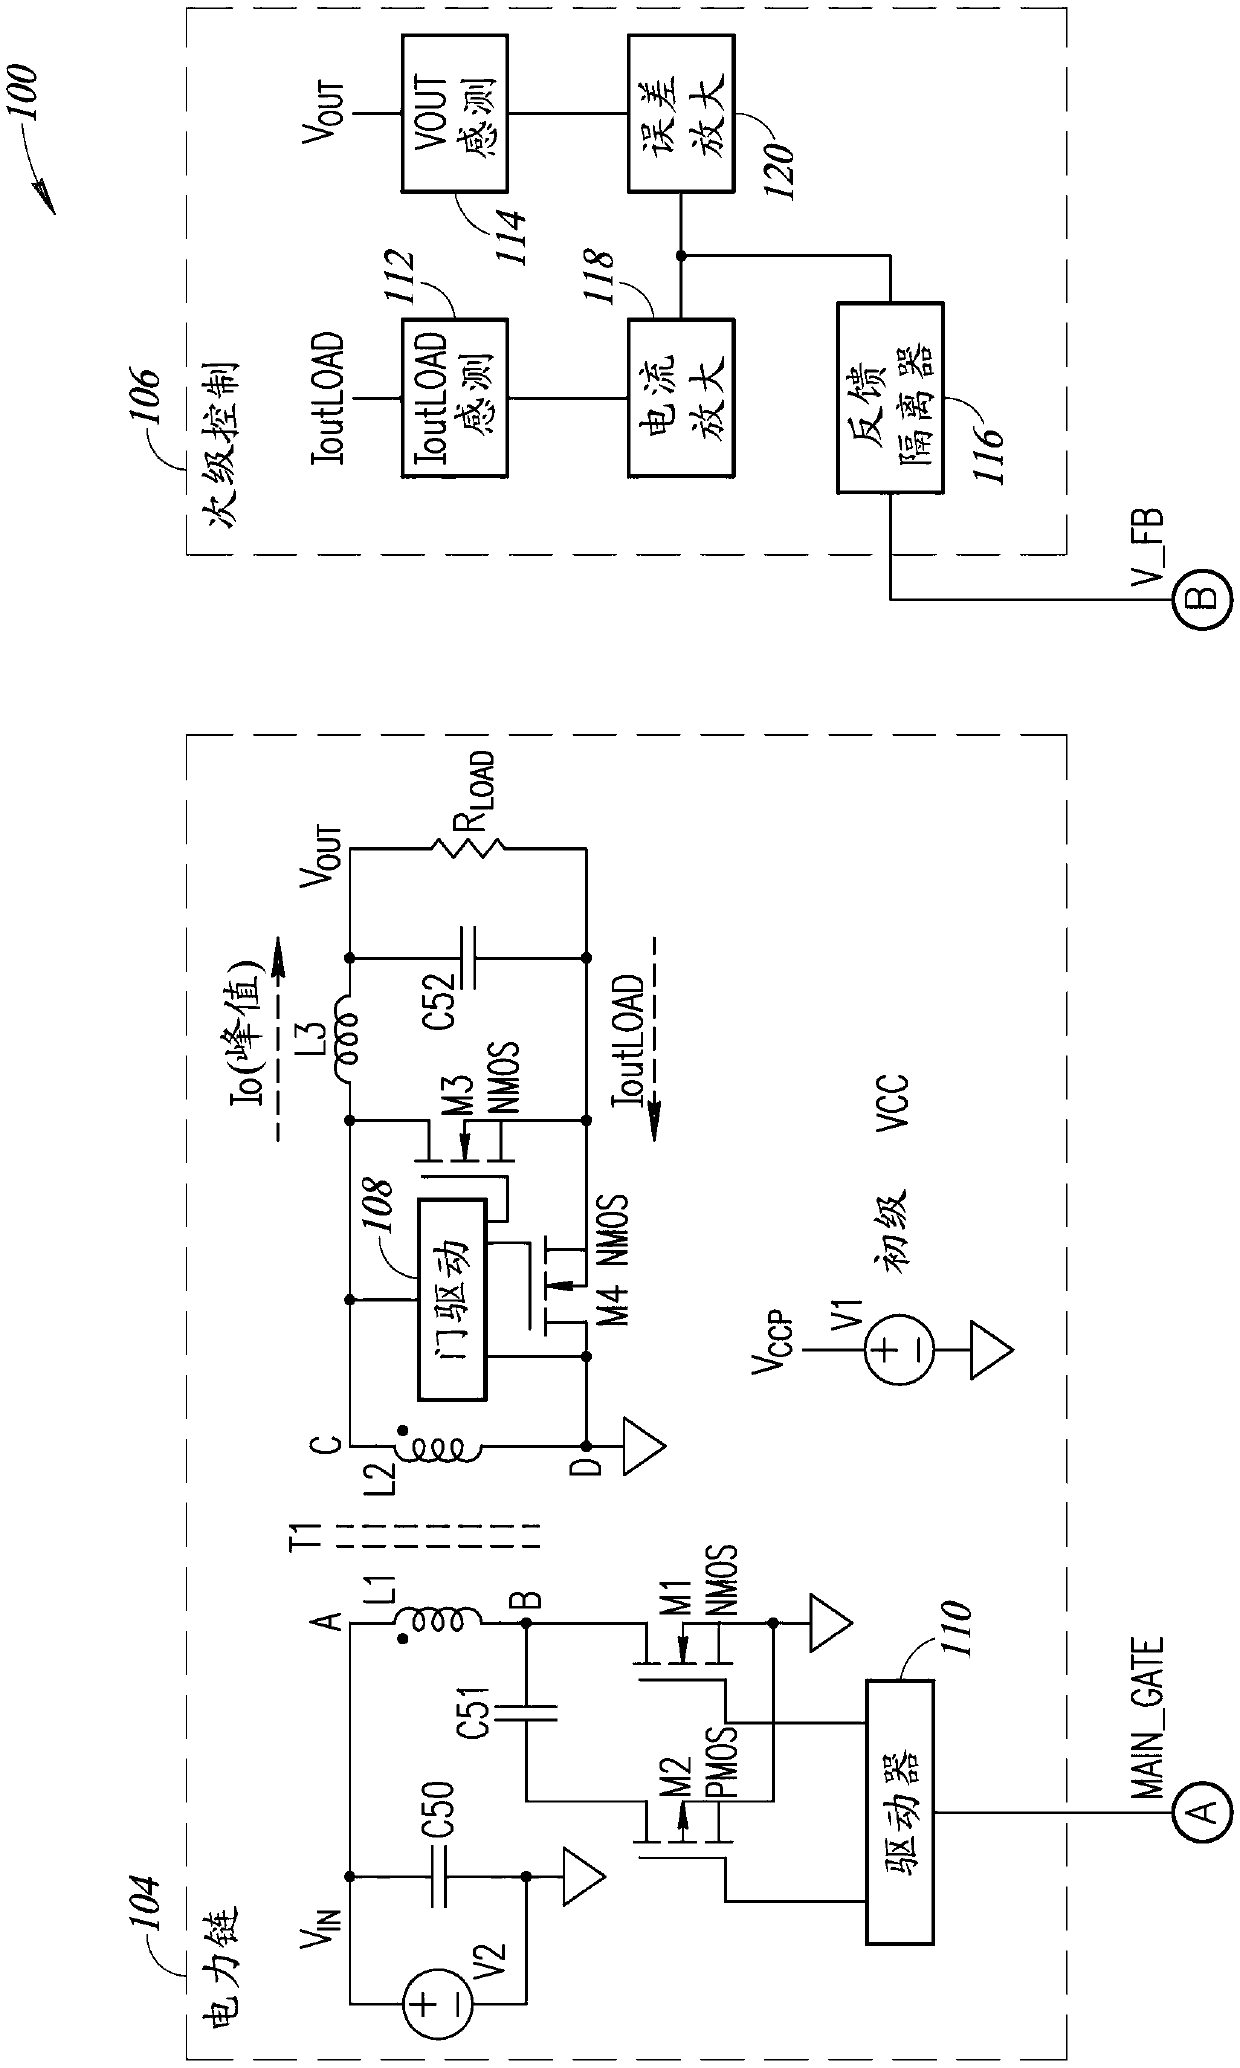 Radiation tolerant analog latch peak current mode control for power converters